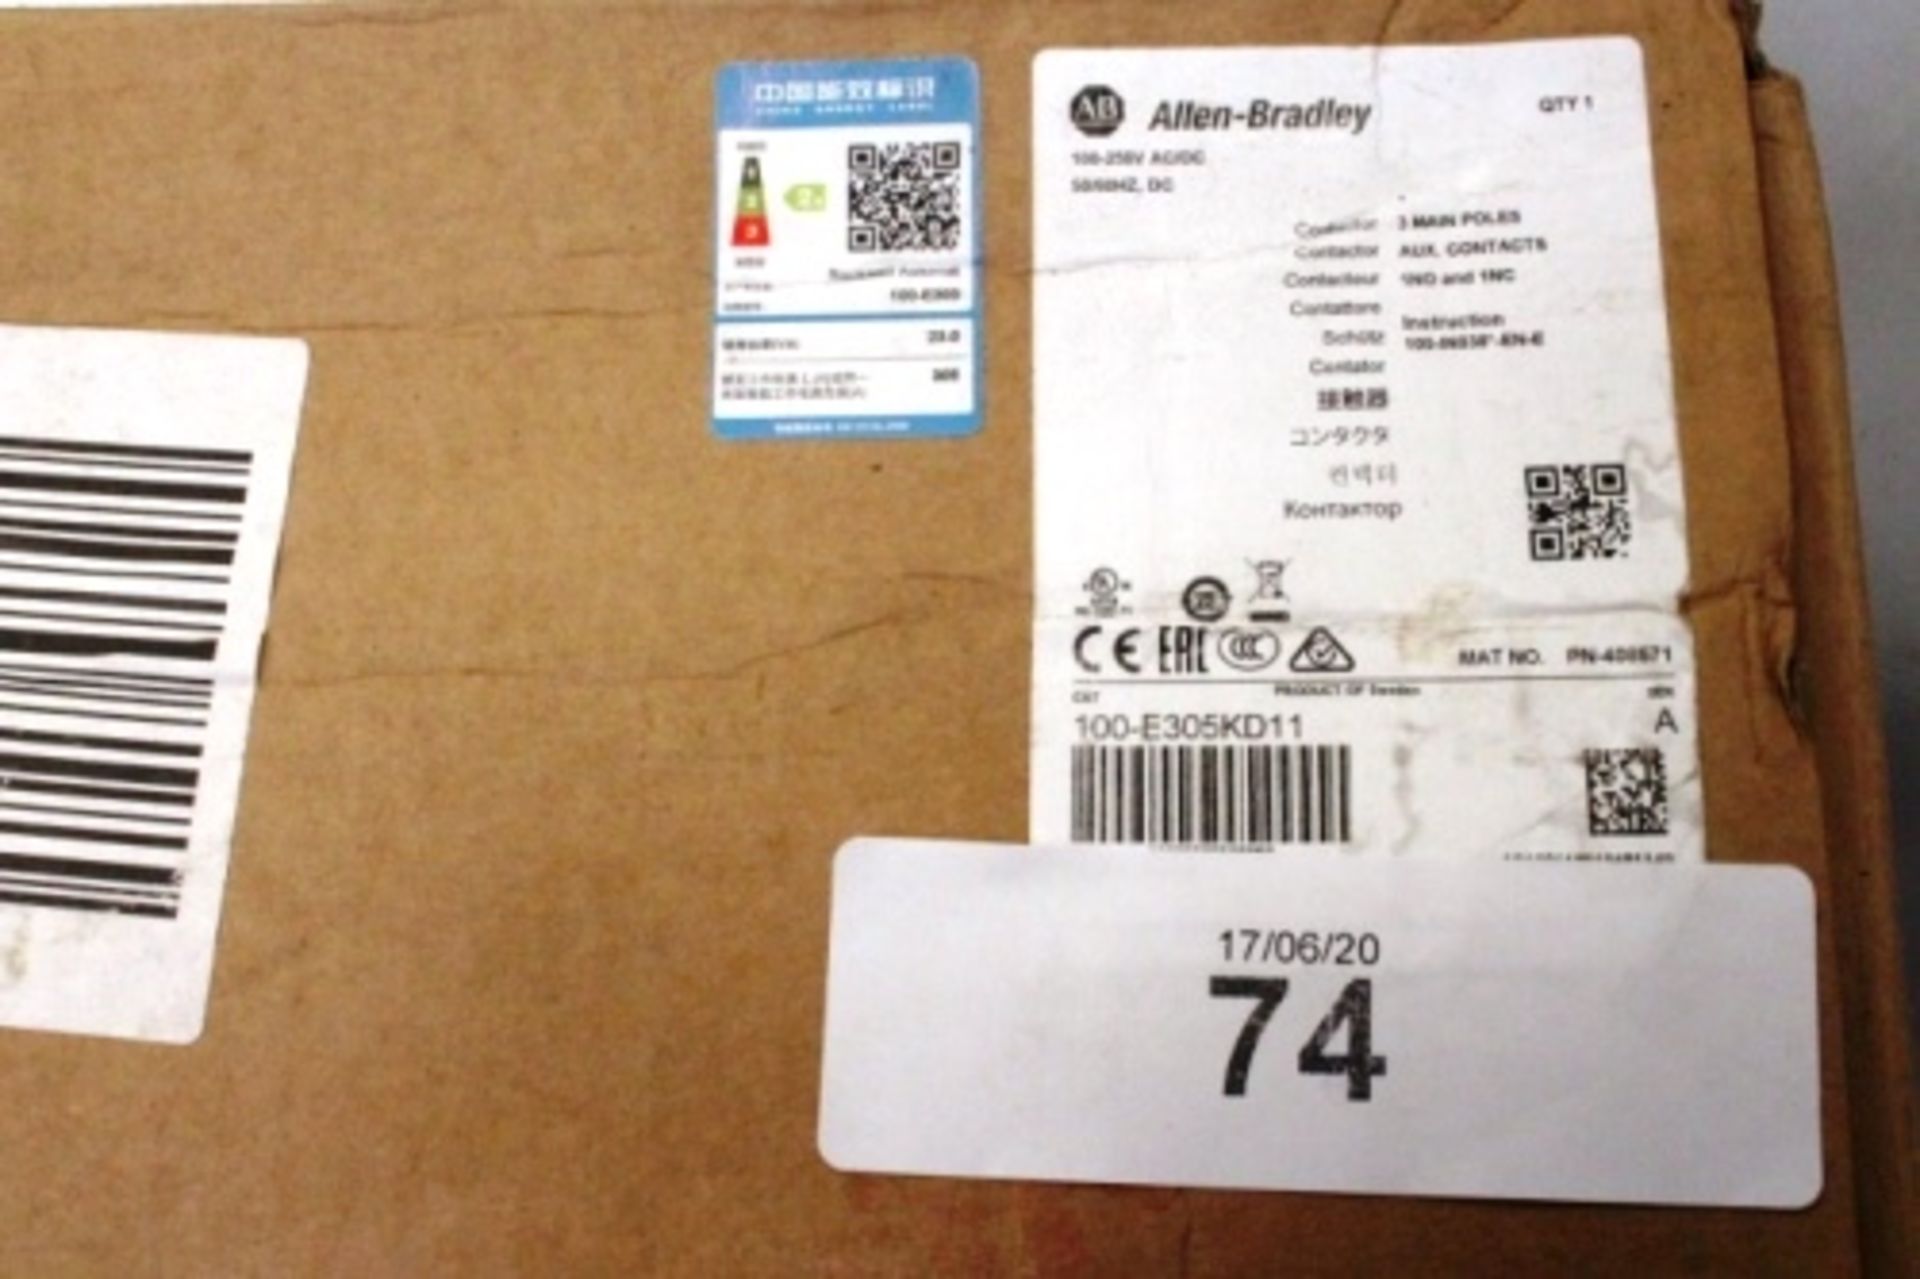 Allen Bradley automation system, model 100-E 305 control box - New in box (ES3) - Image 2 of 2